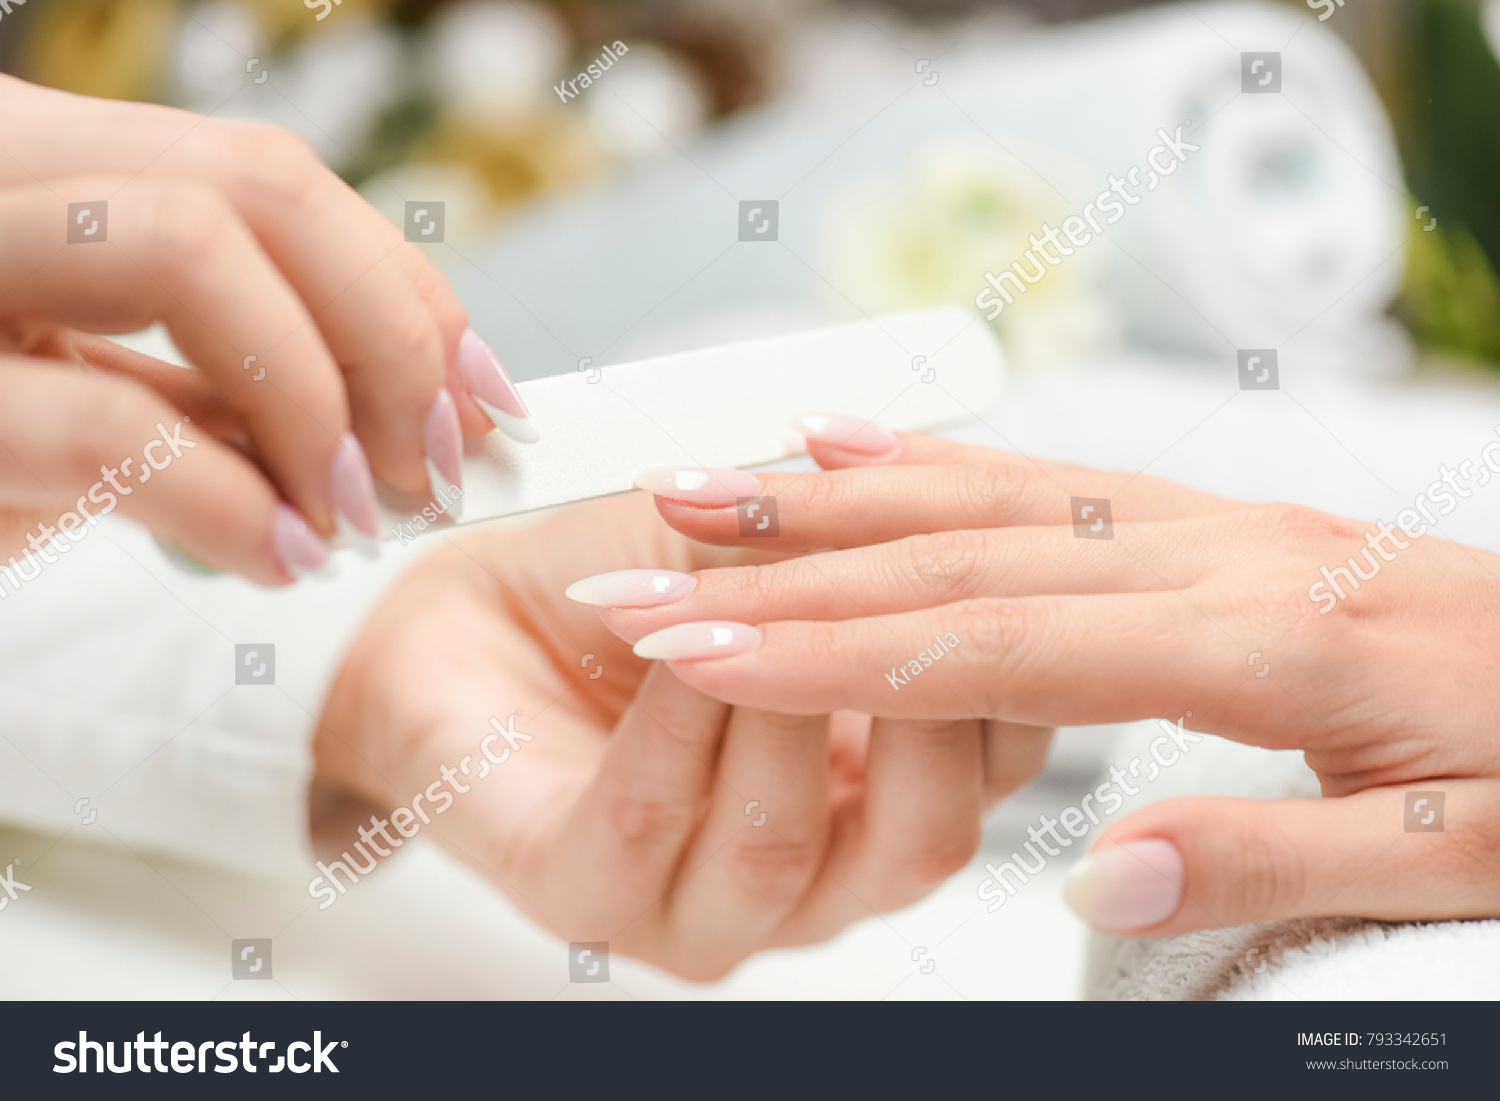 Nails manicure with file. Woman beautiful nail care. after filling. #793342651